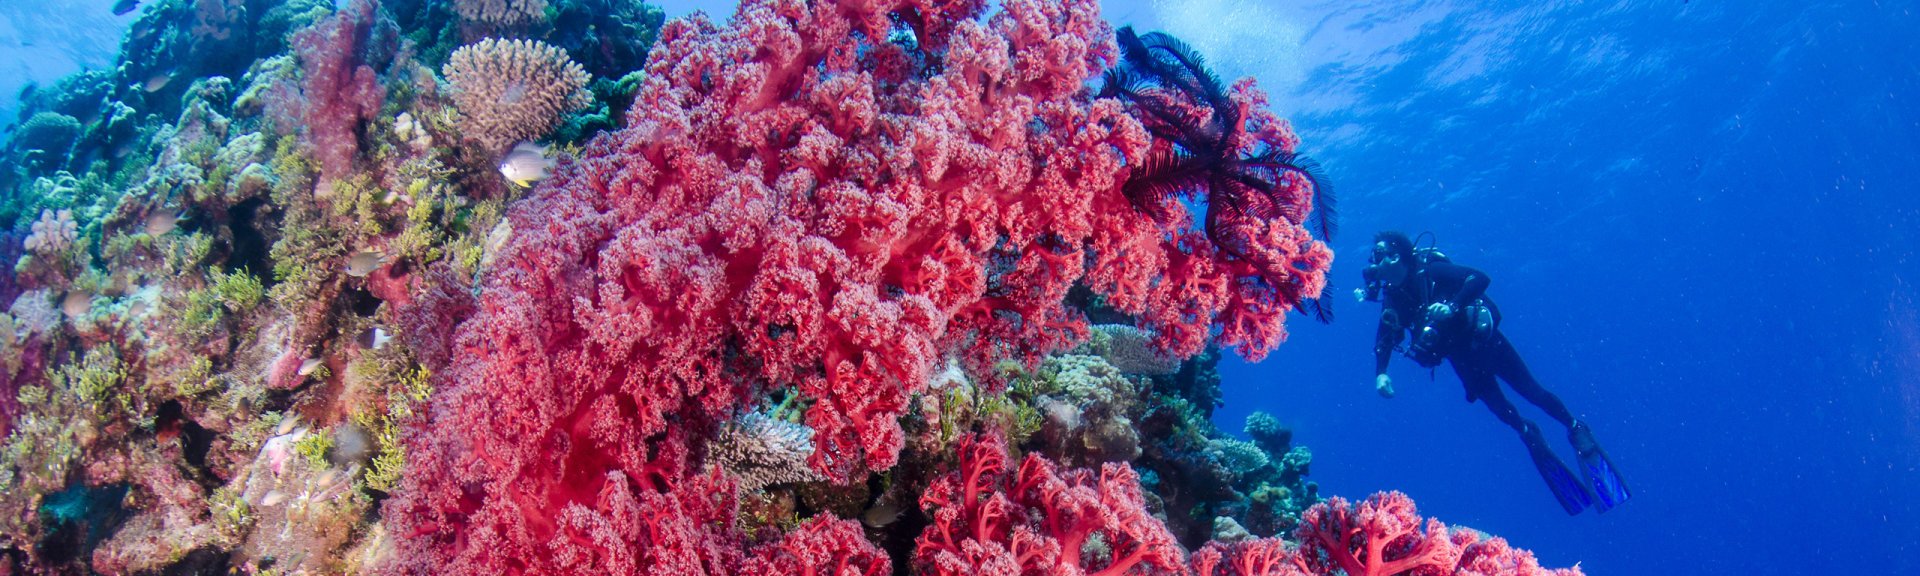 Pink Coral and diver. Photo by Howard Wormsley, copyright Mike Ball Dive Expeditions.